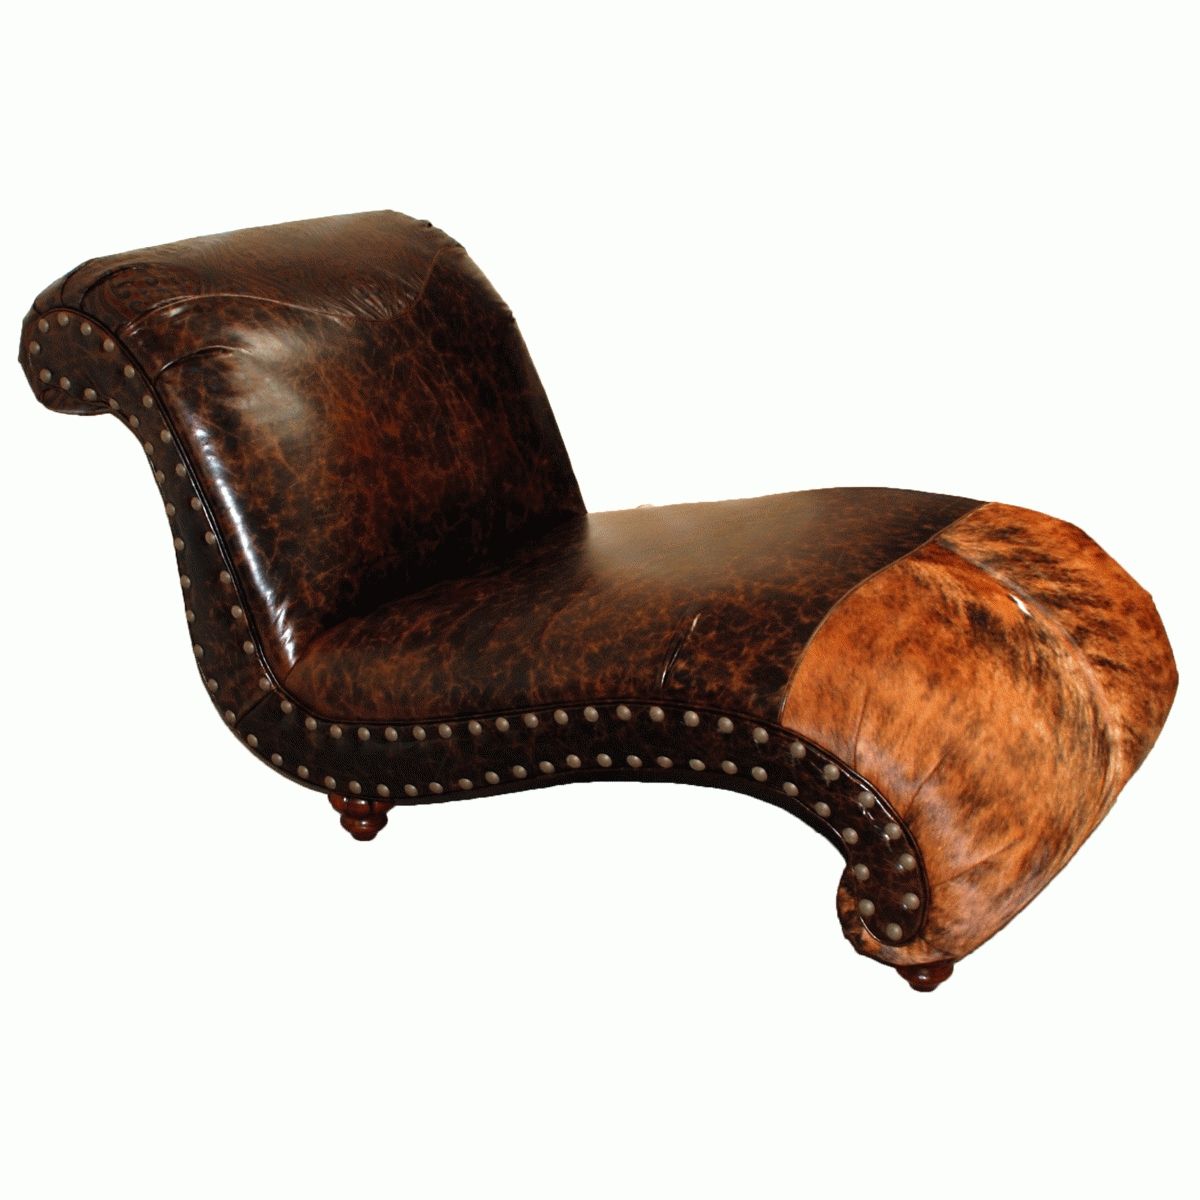 Widely Used Western Leather Furniture & Cowboy Furnishings From Lones Star With Leather Chaise Lounge Chairs (View 13 of 15)